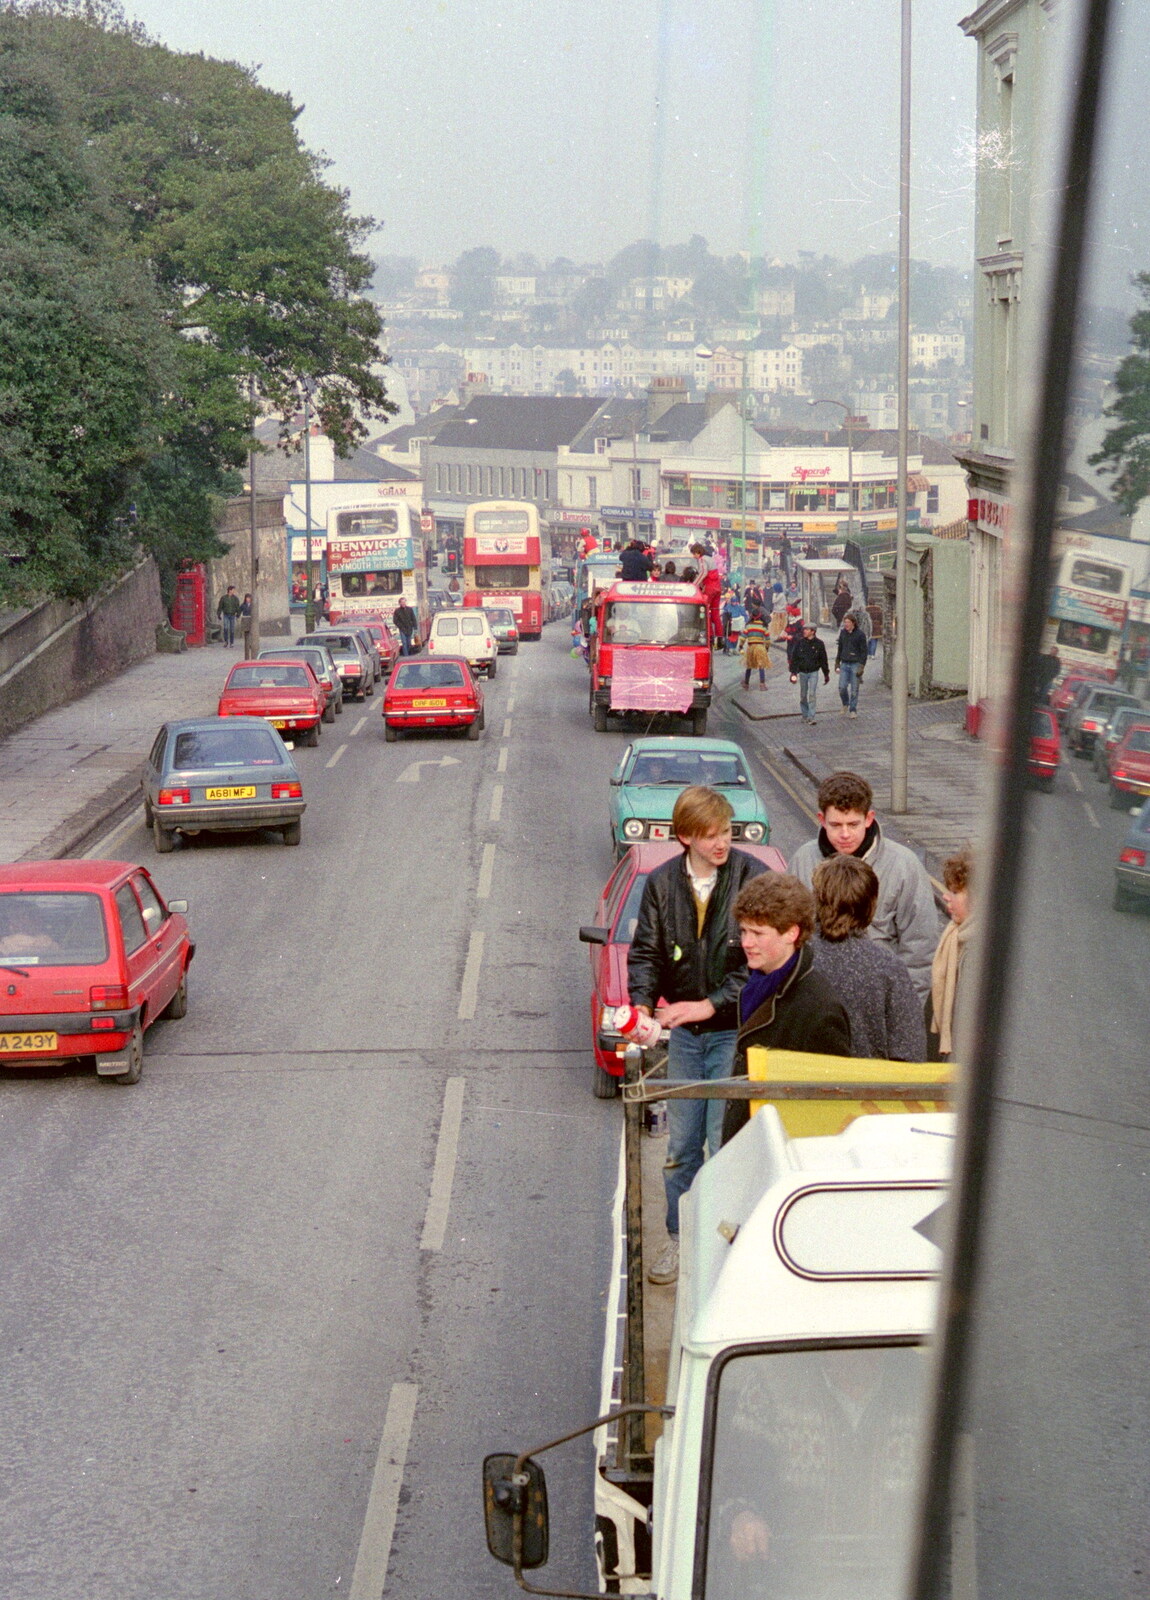 A view of Mutley Plain from the top of a bus from Uni: PPSU "Jazz" RAG Street Parade, Plymouth, Devon - 17th February 1986